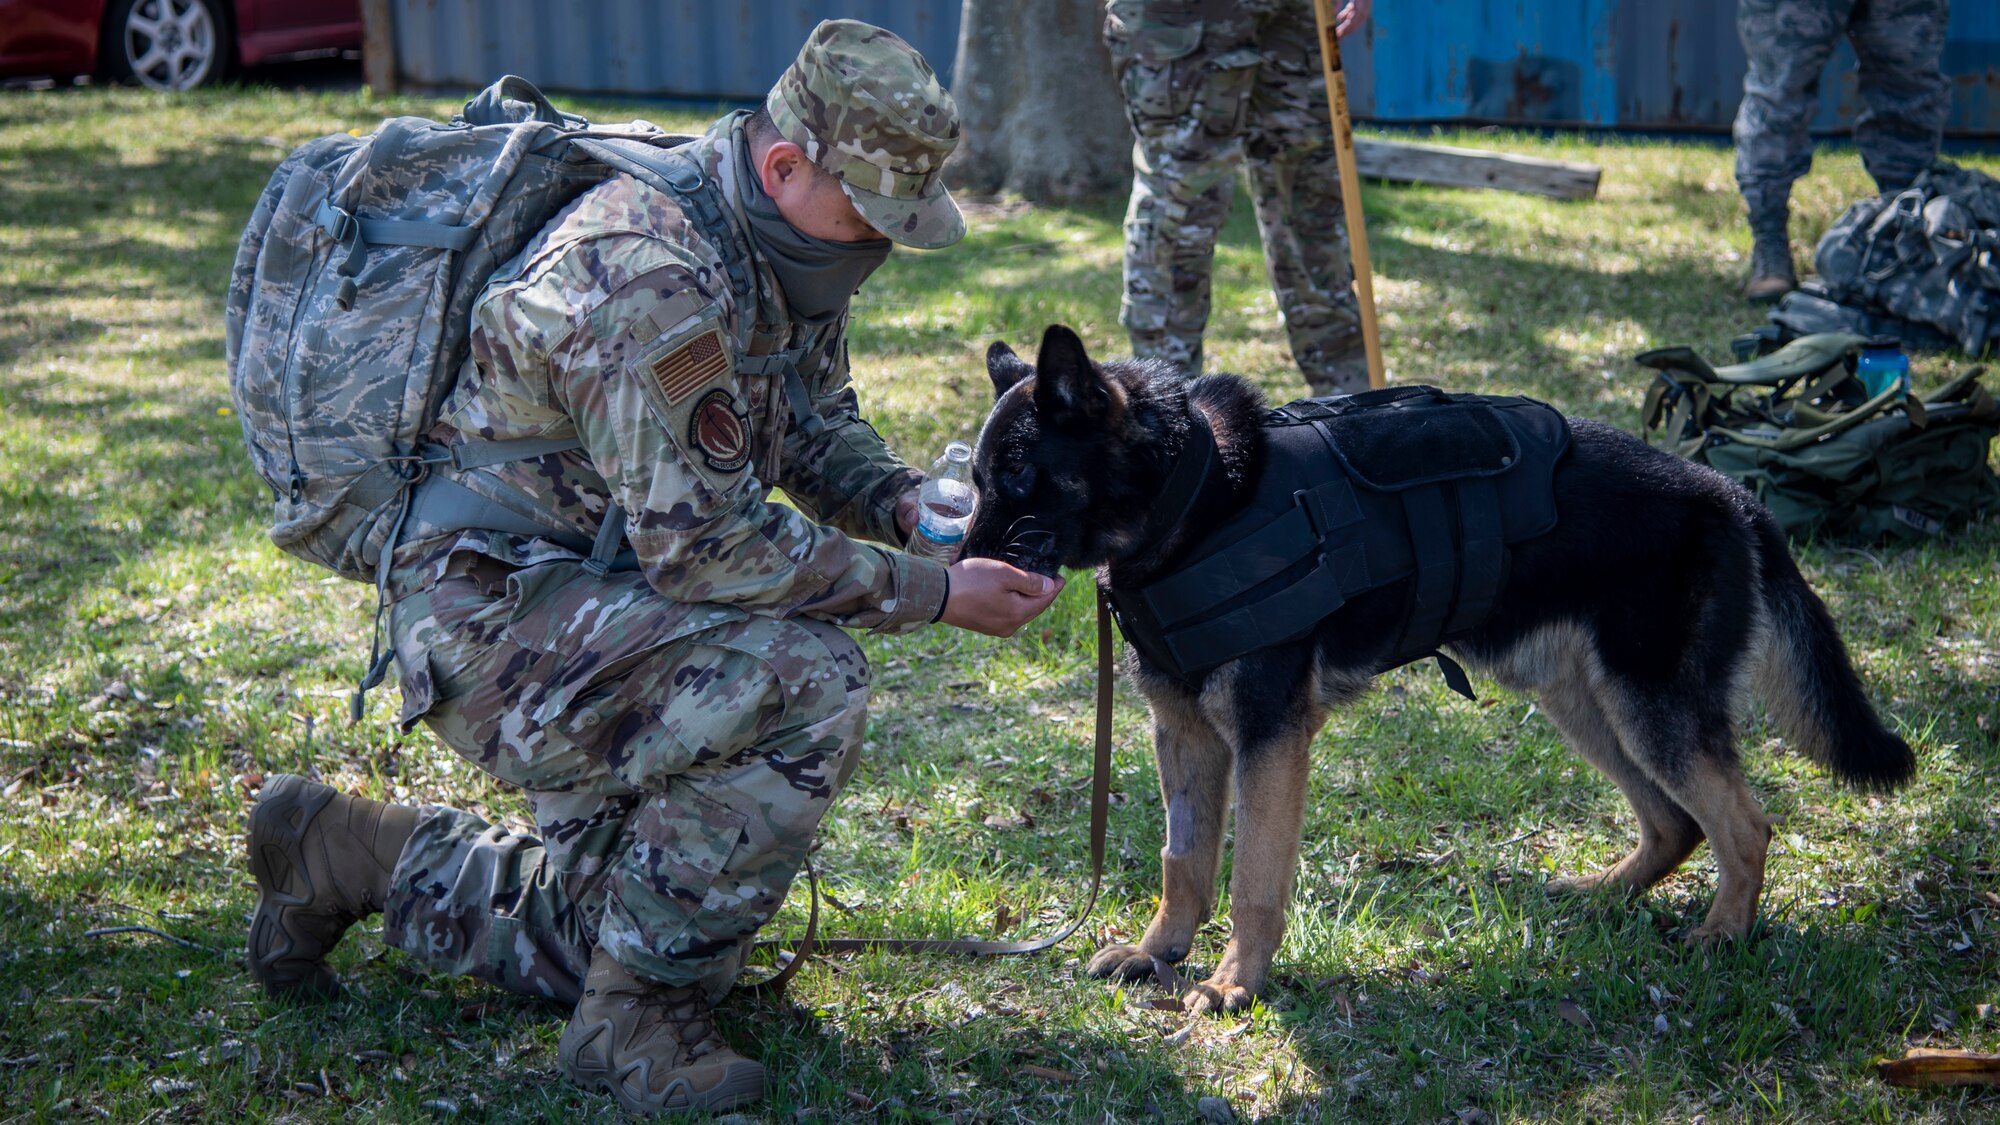 U.S. Air Force Staff Sgt. Thanh Nguyen, a 35th Security Forces Squadron military working dog handler, gives water to her MWD, Laky, before the 2020 Police Week 5K ruck march at Misawa Air Base, Japan, May 11, 2020. The 2020 Police Week consisted of events that reflect what police officers do every day and commemorate those who have fallen which included a ruck march and a final guard mount. (U.S. Air Force photo by Airman 1st Class China M. Shock)